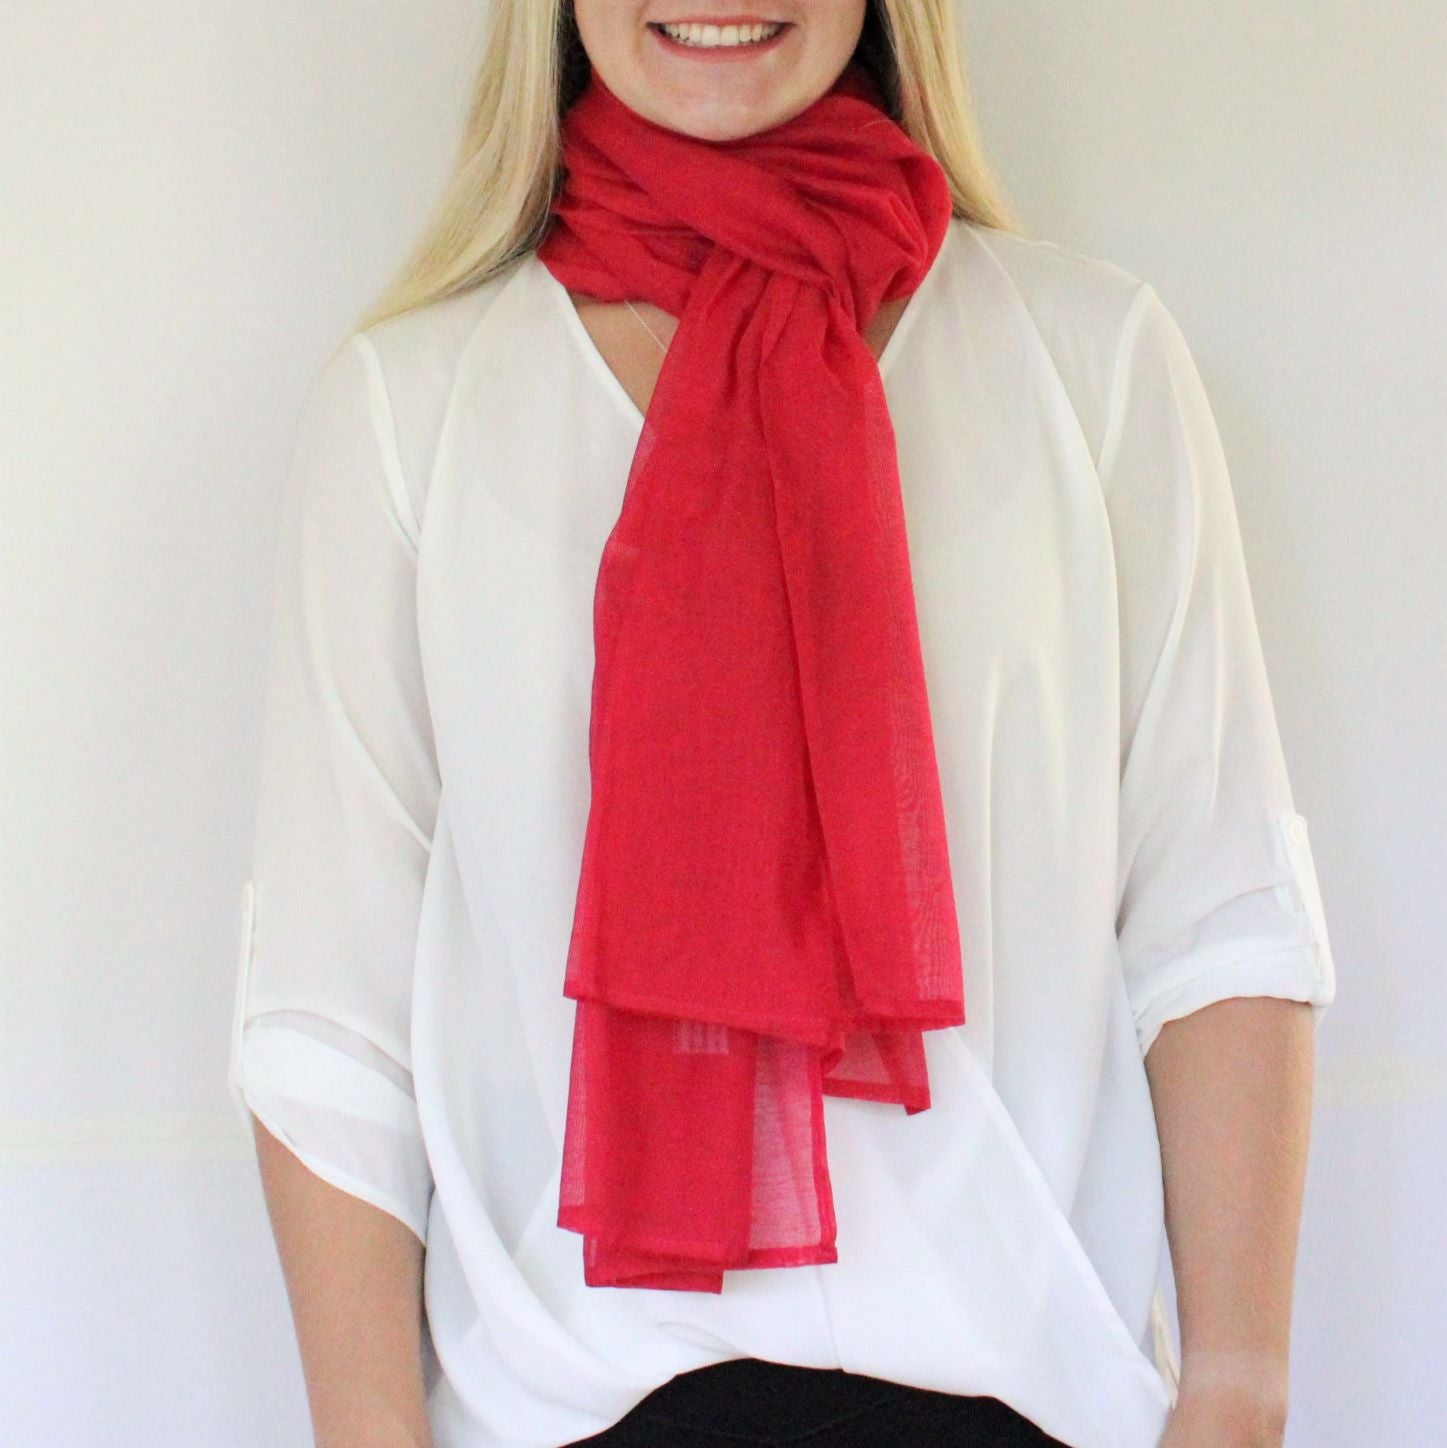 The Upcycled Scarf - Solid colors